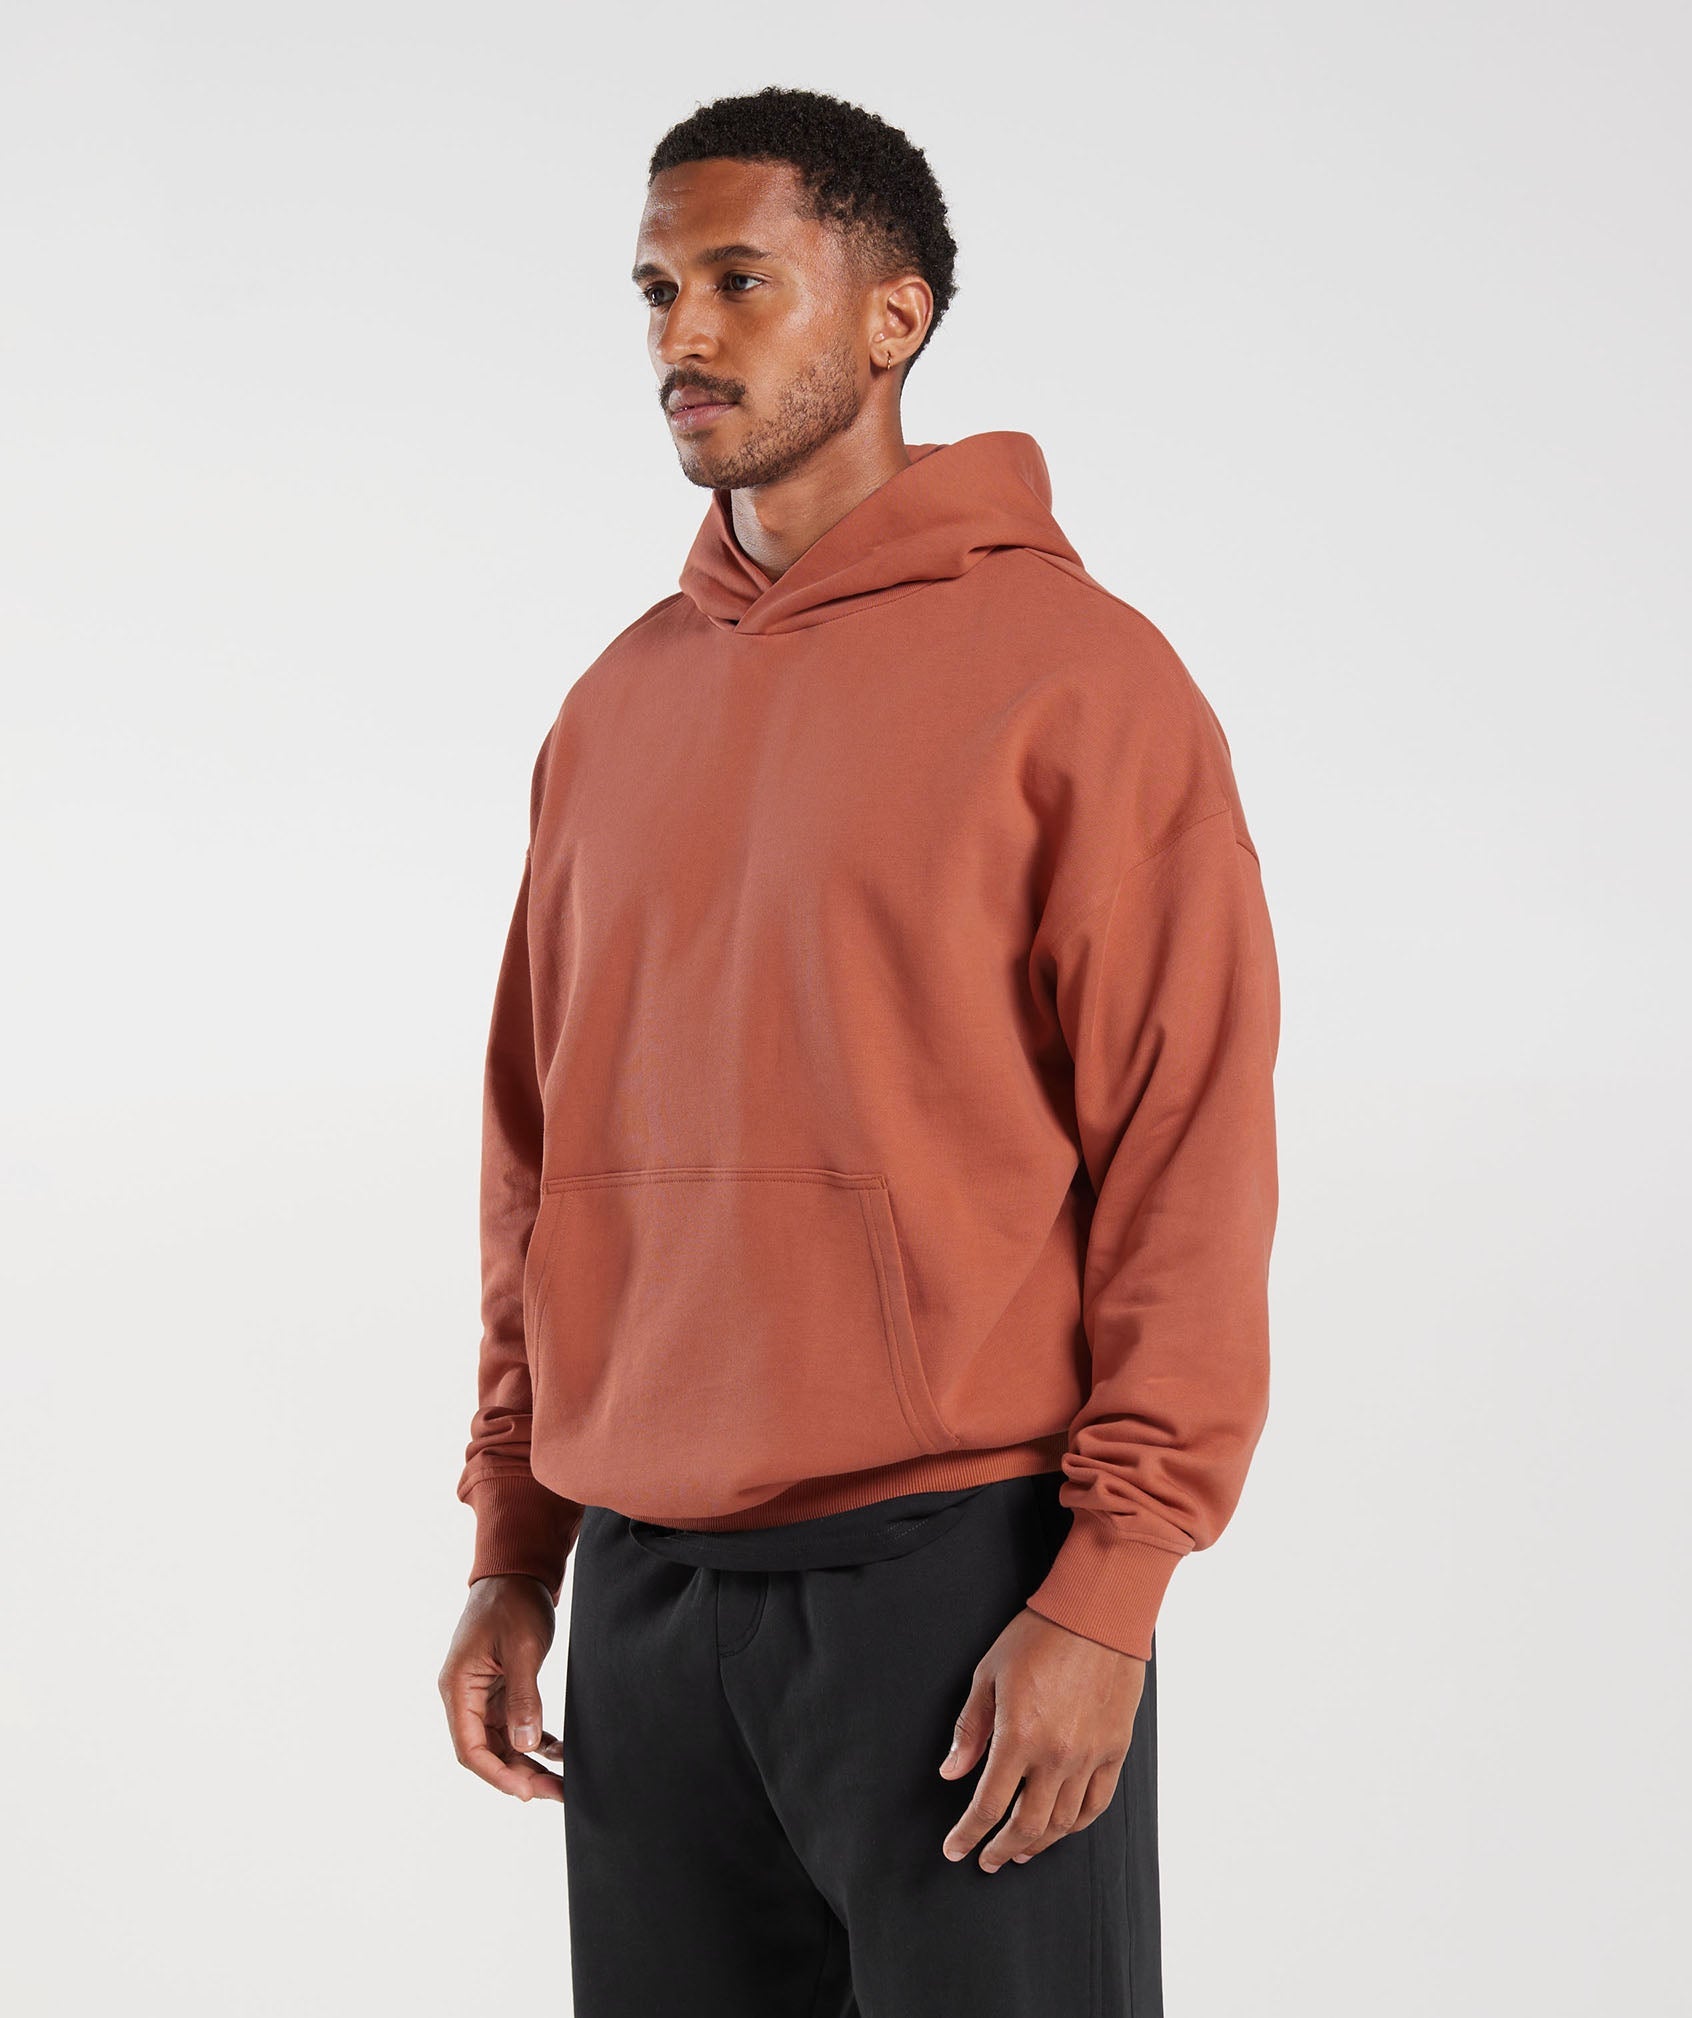 Rest Day Essentials Hoodie in Persimmon Red - view 3